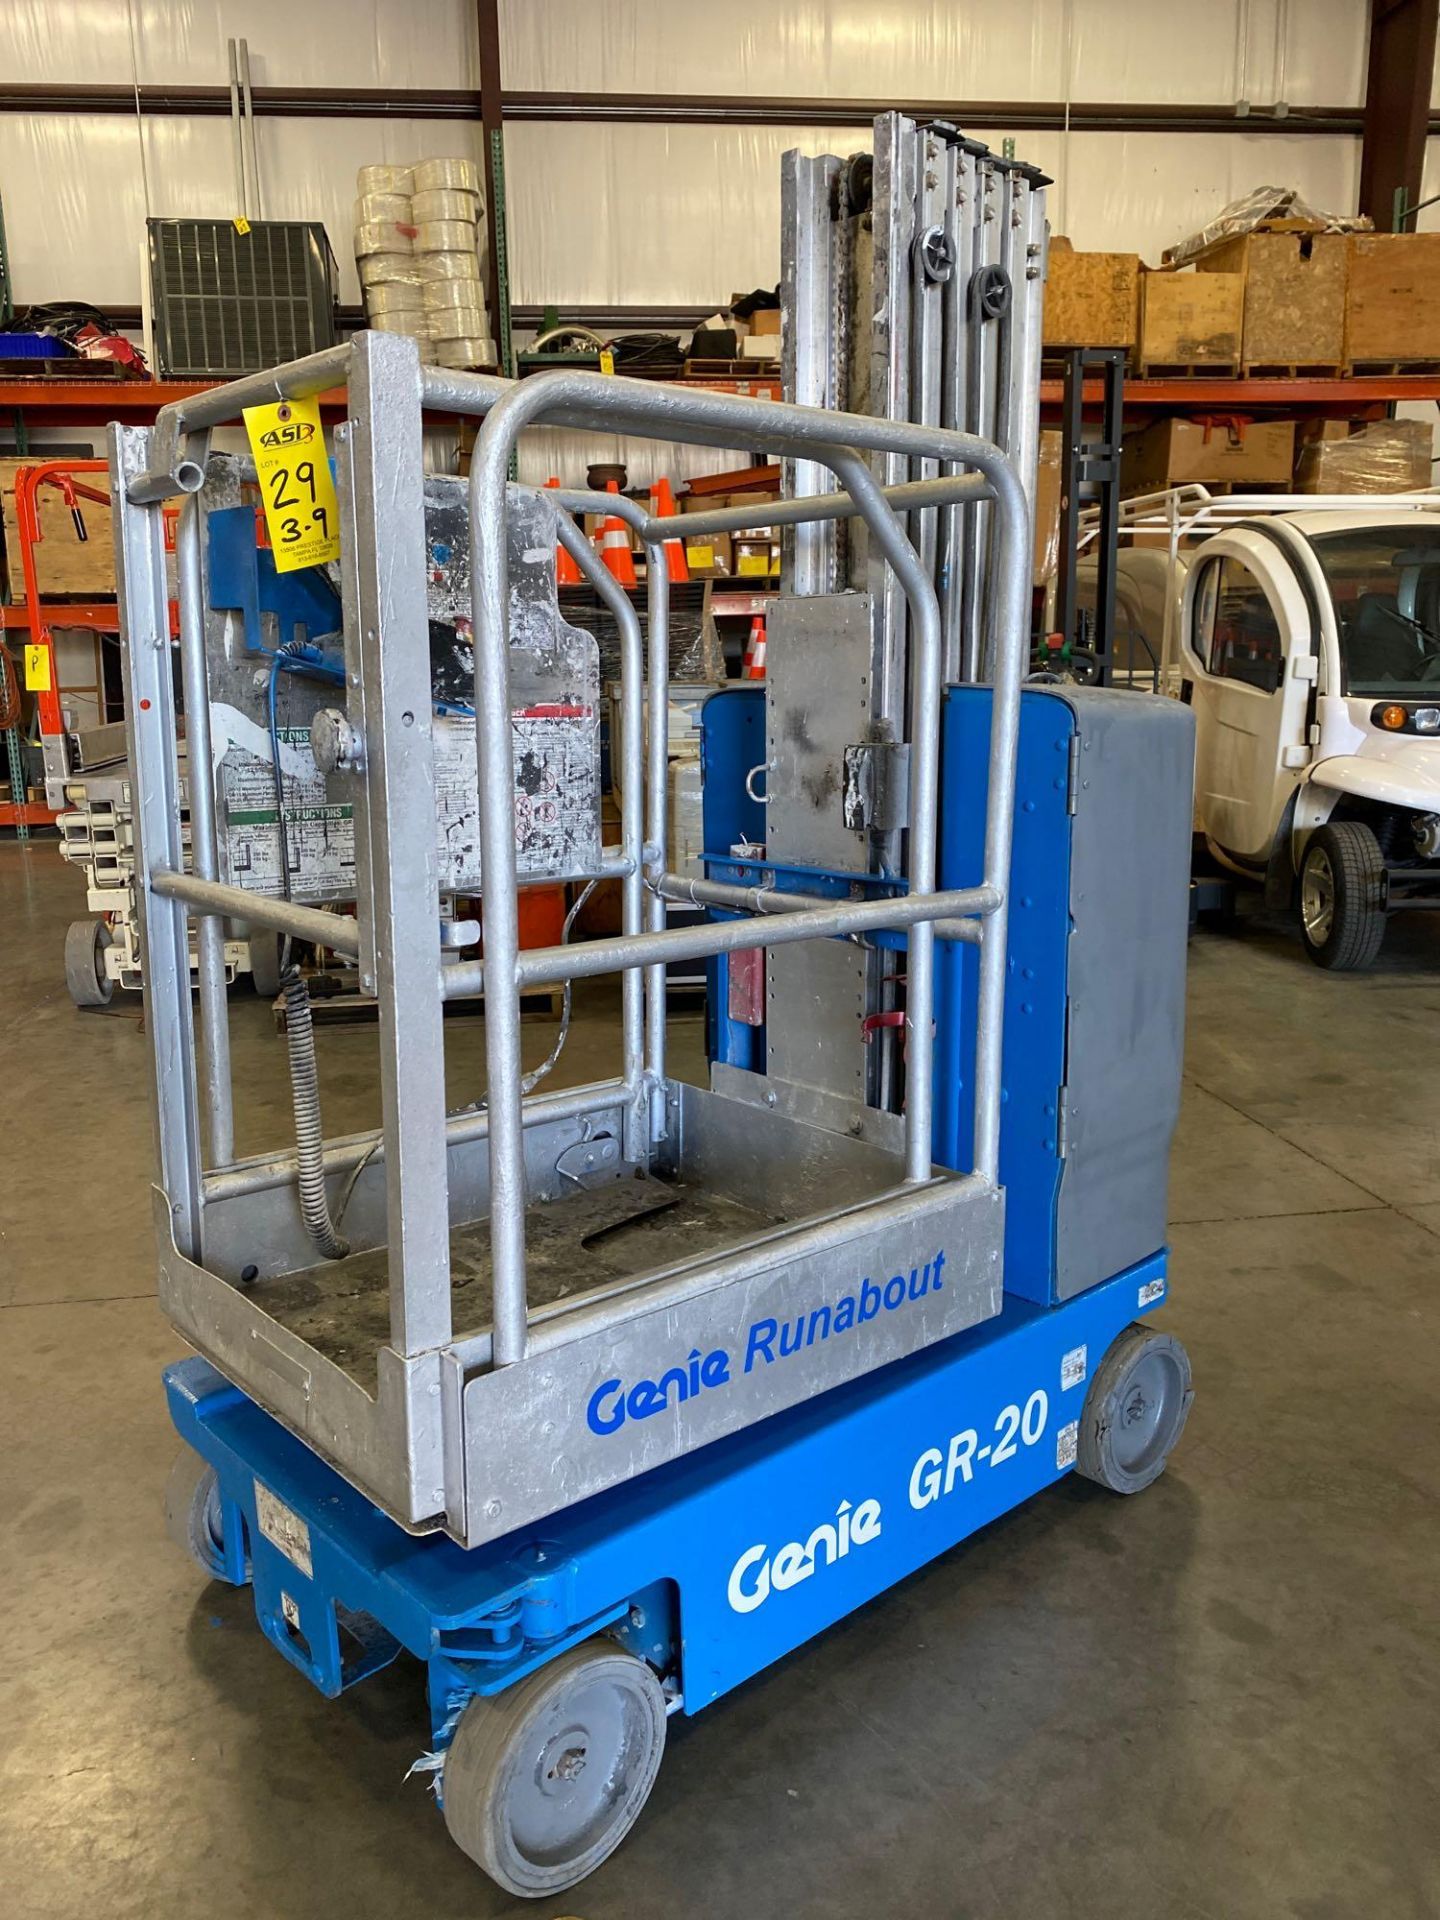 2013 GENIE RUNABOUT GR20, 26' WORKING HEIGHT, RUNS AND OPERATES - Image 2 of 4